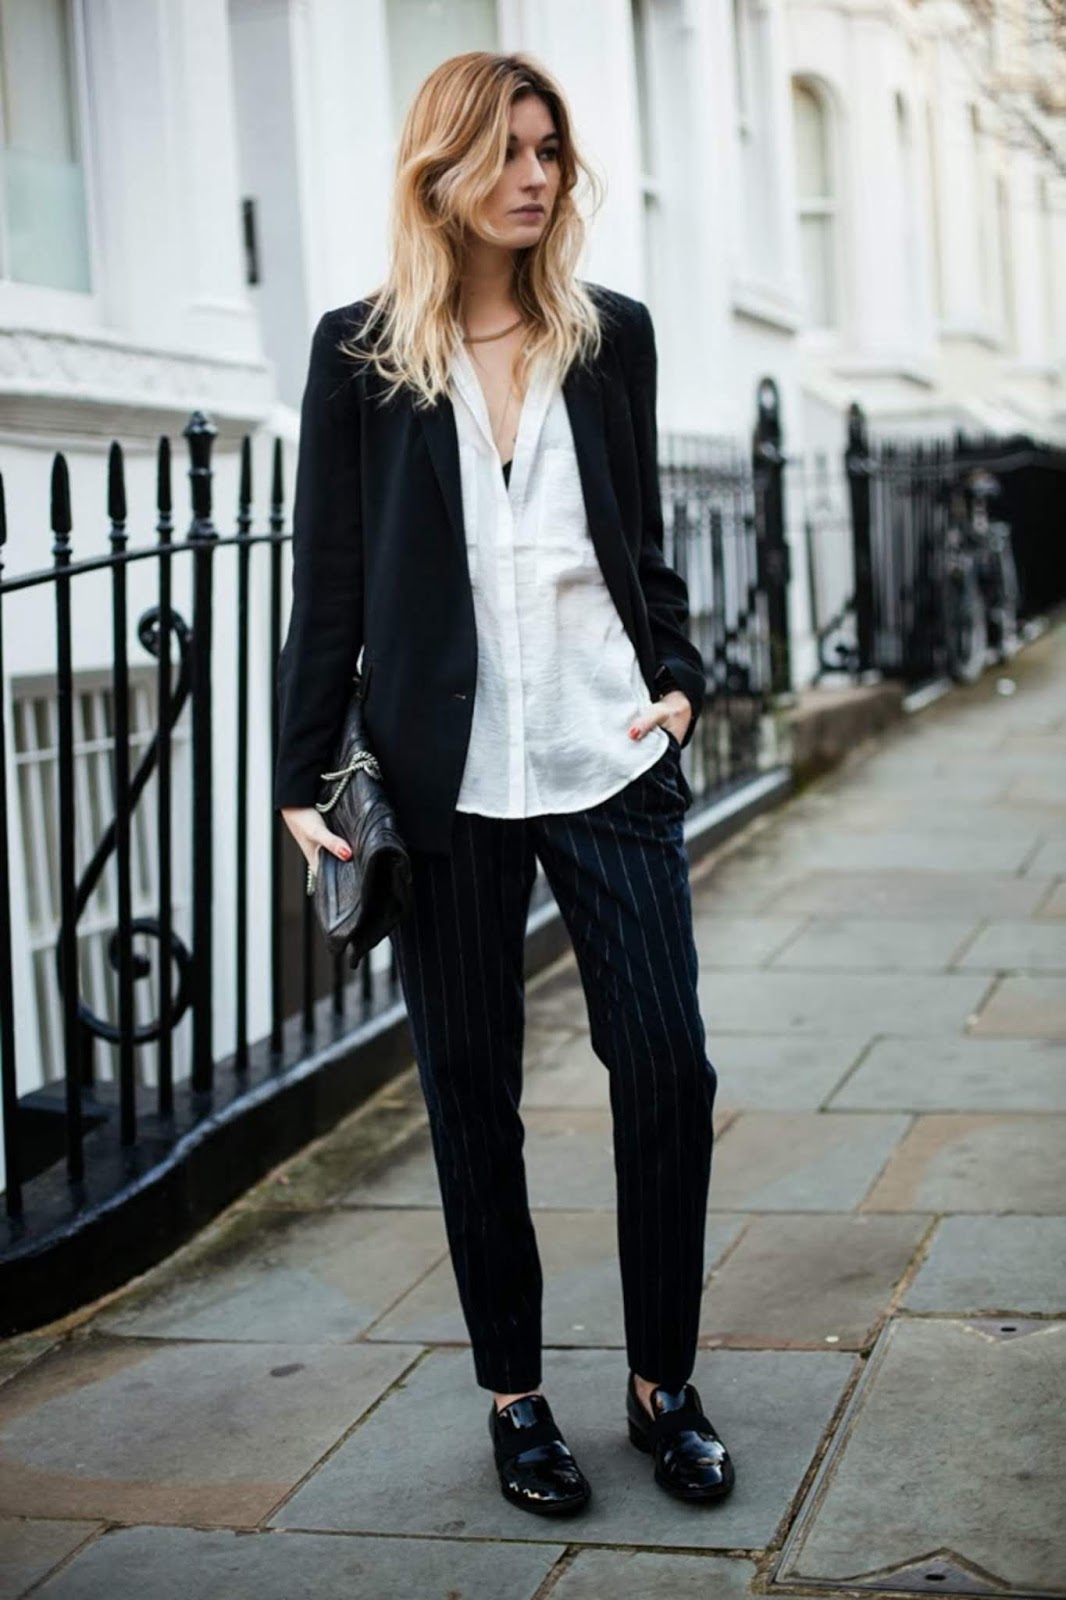 Le Fashion: Pinstripe Pants Add an Extra Chic Touch to Your Outfit